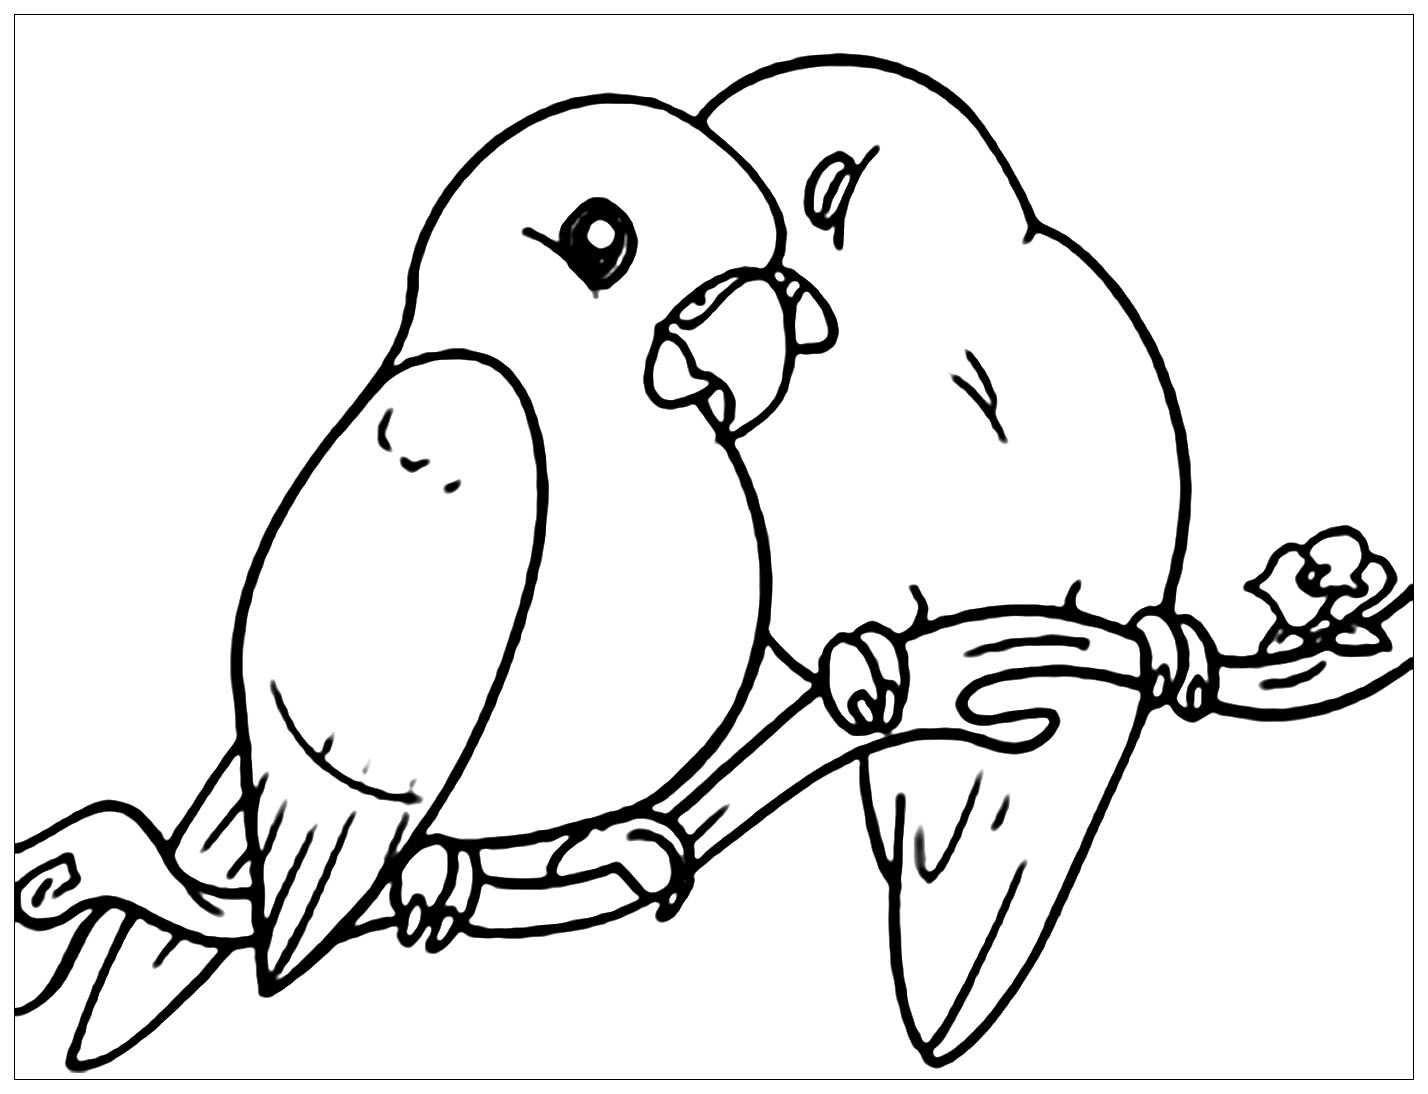 Small birds - Birds Kids Coloring Pages